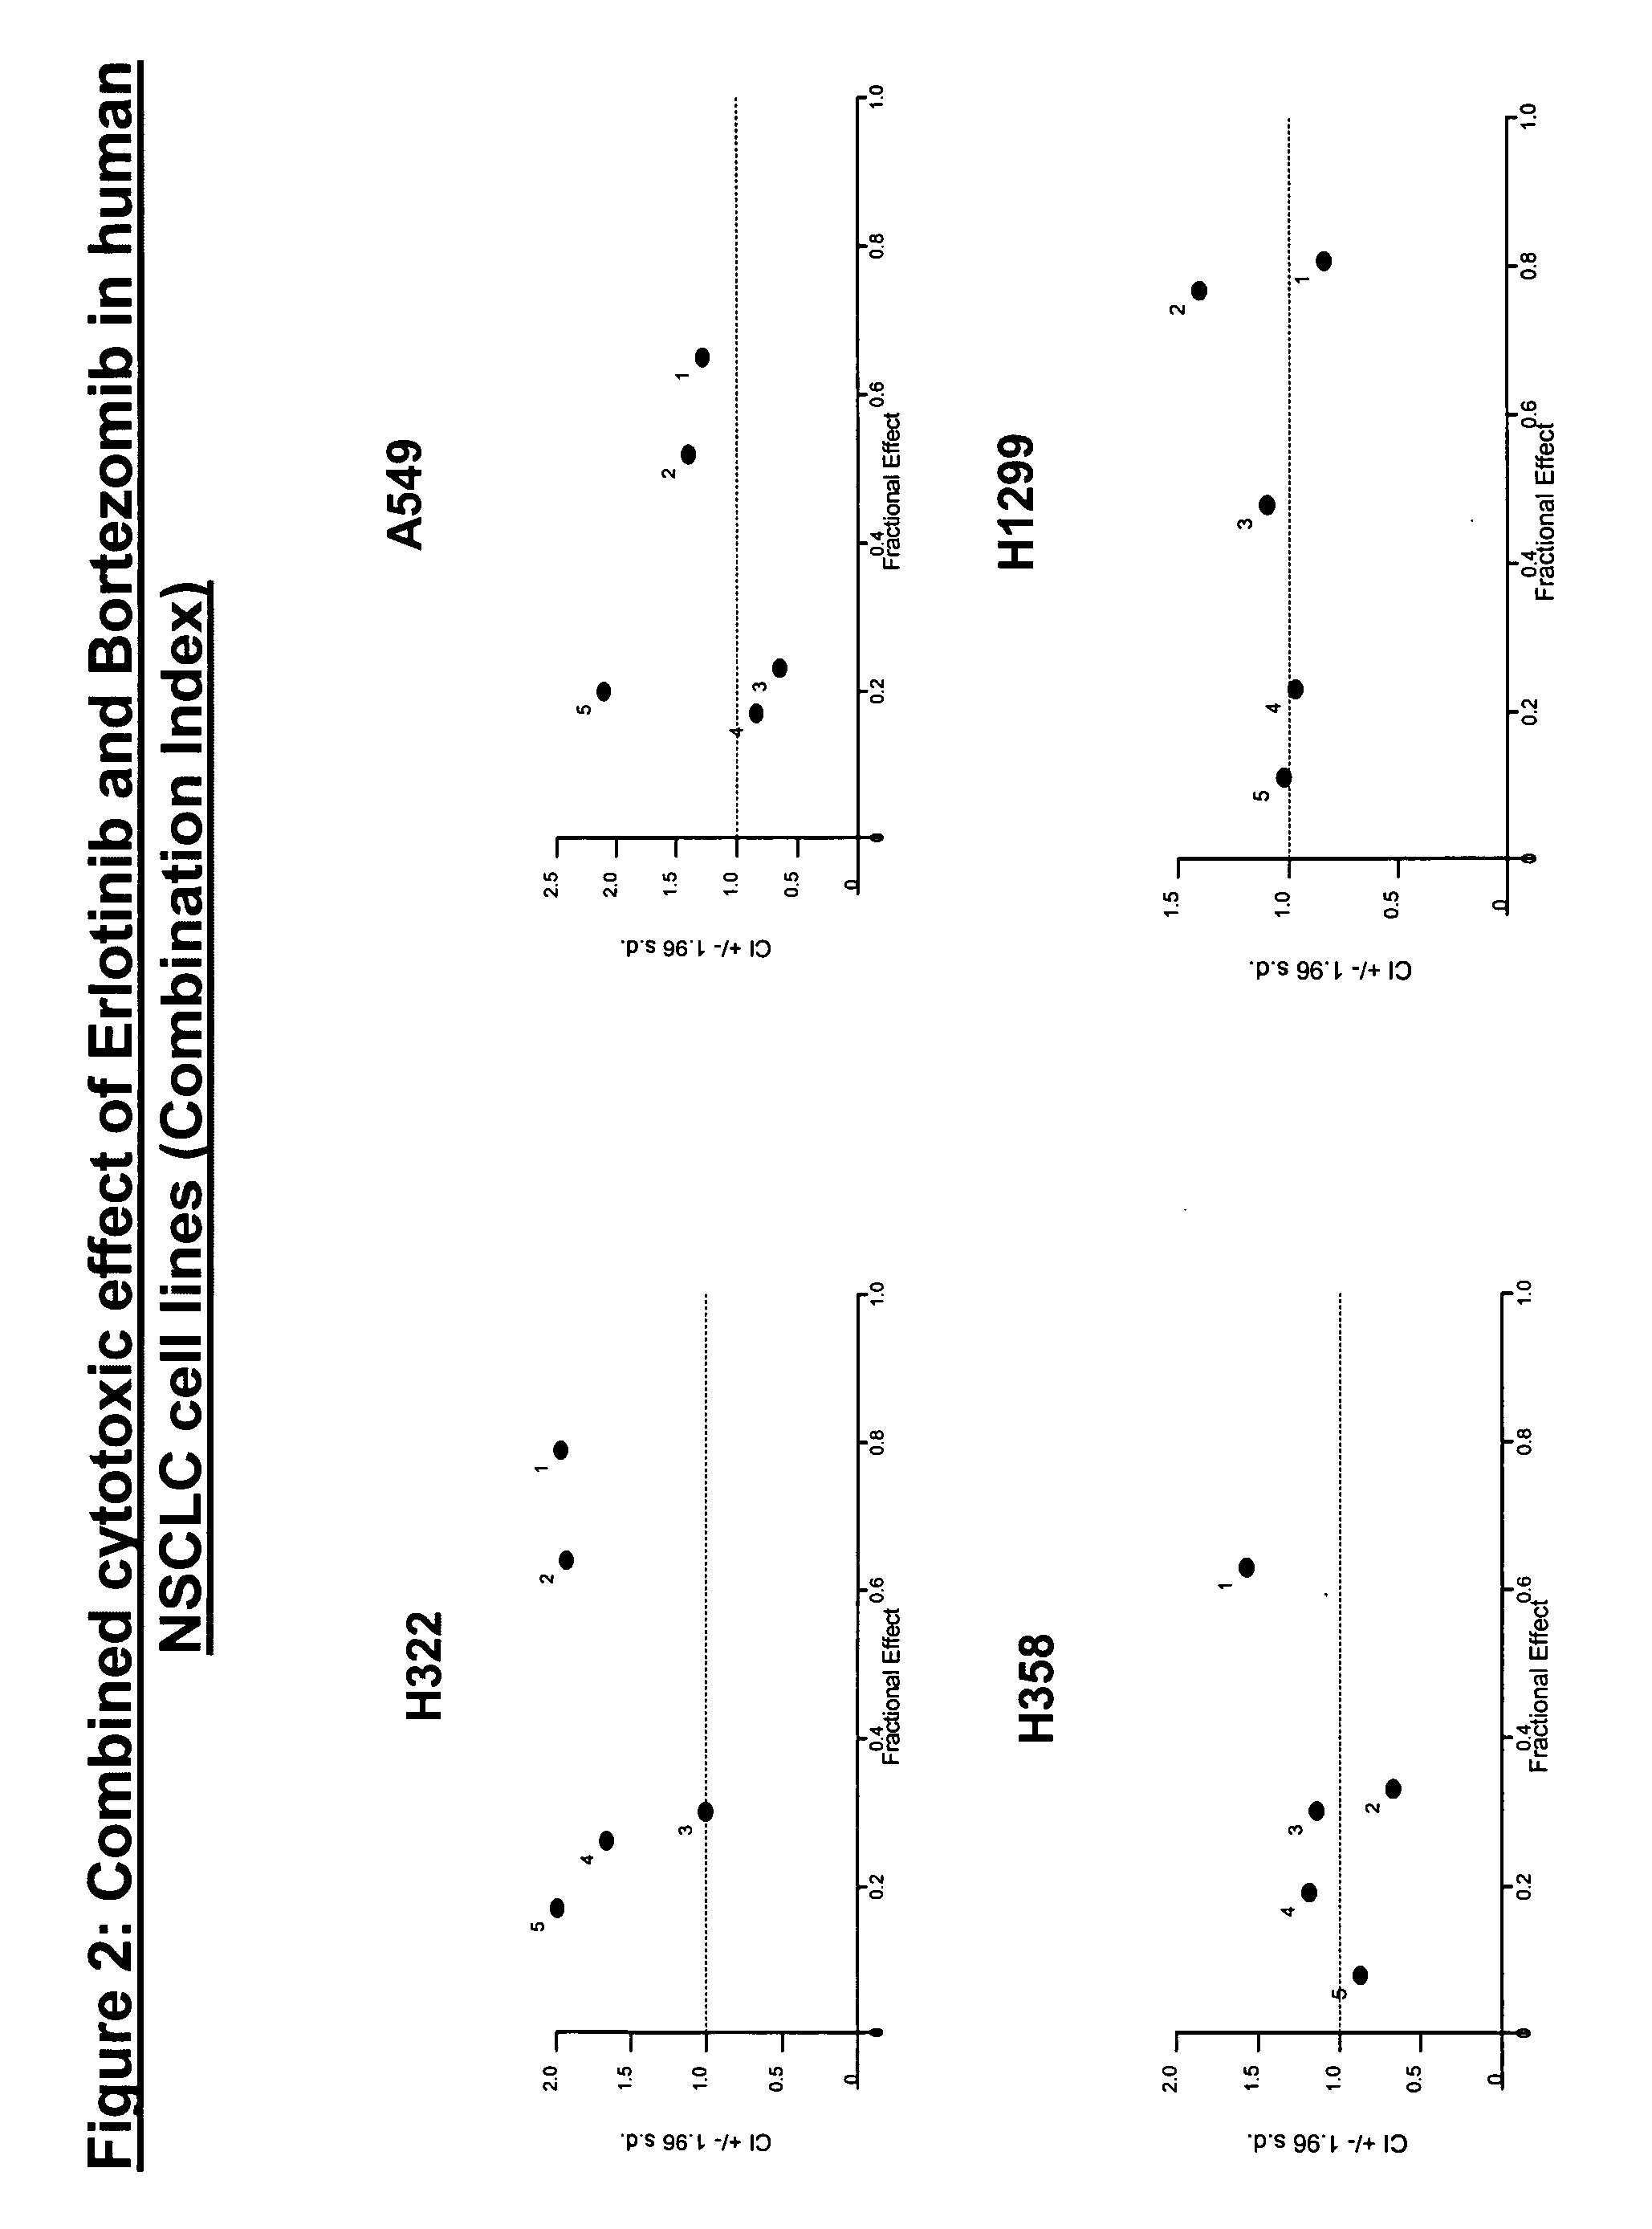 Combined treatment with bortezomib and an epidermal growth factor receptor kinase inhibitor